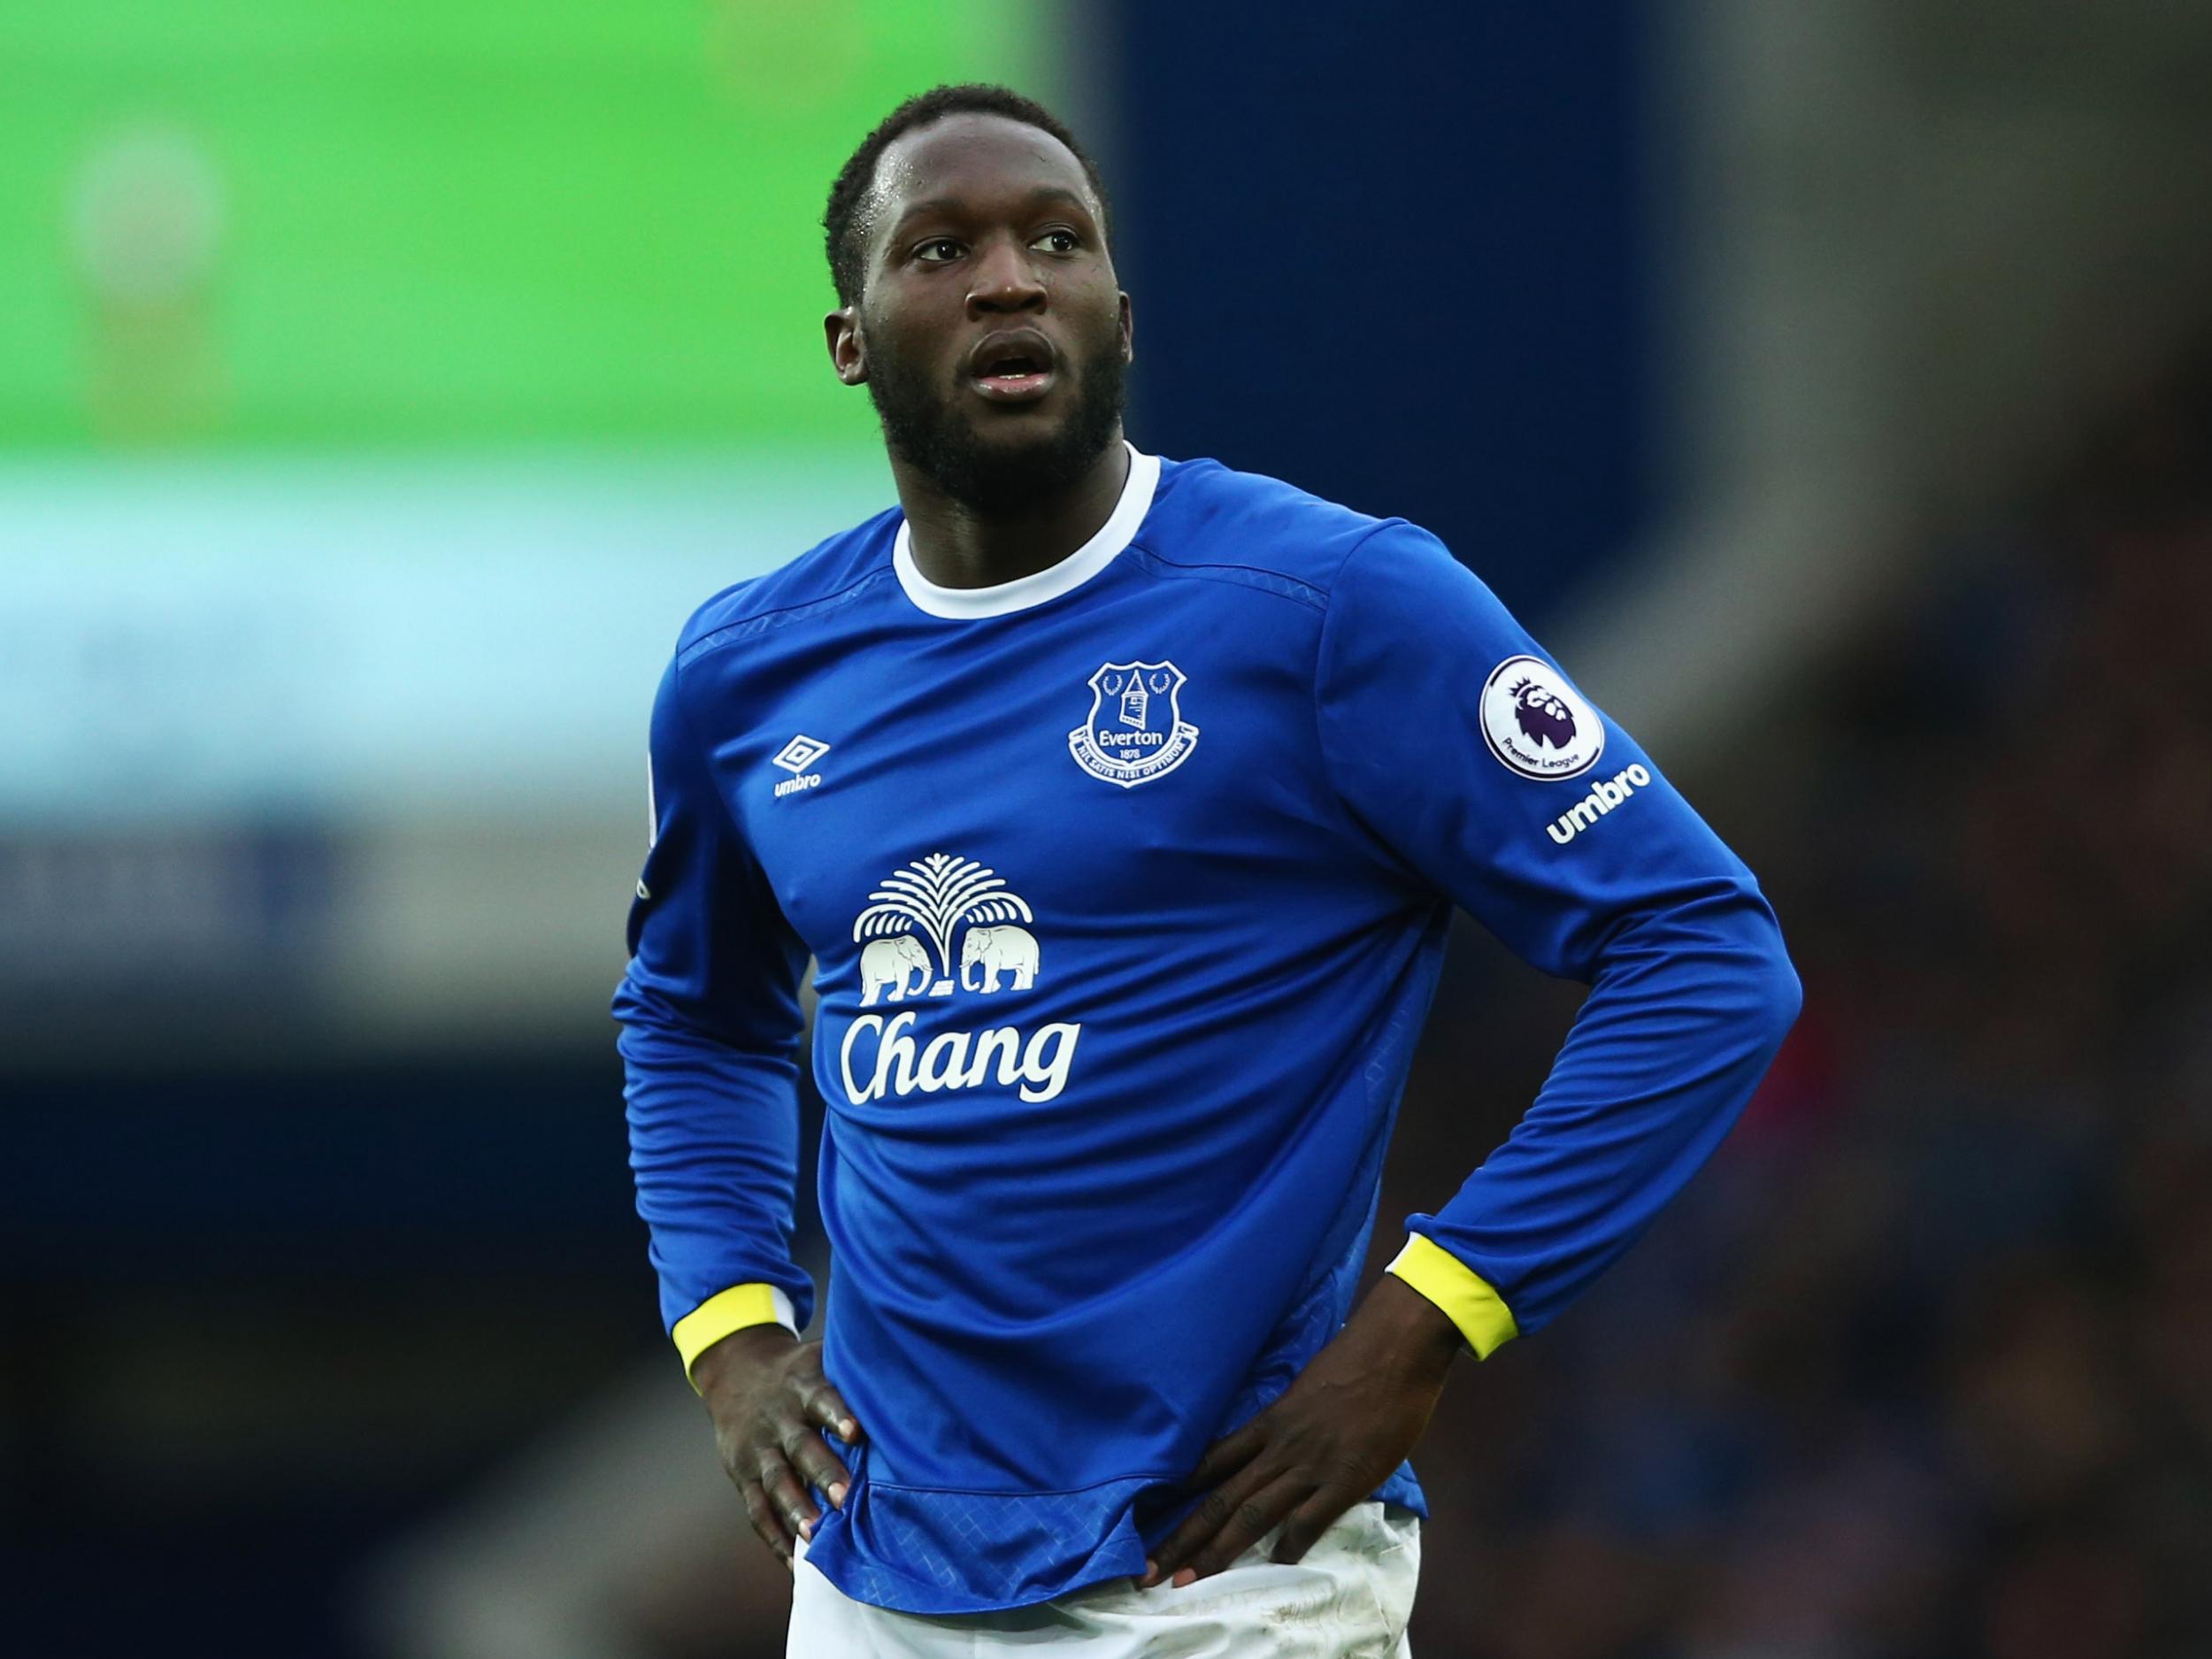 Lukaku wants to leave Everton this summer and United have stolen a march on Chelsea